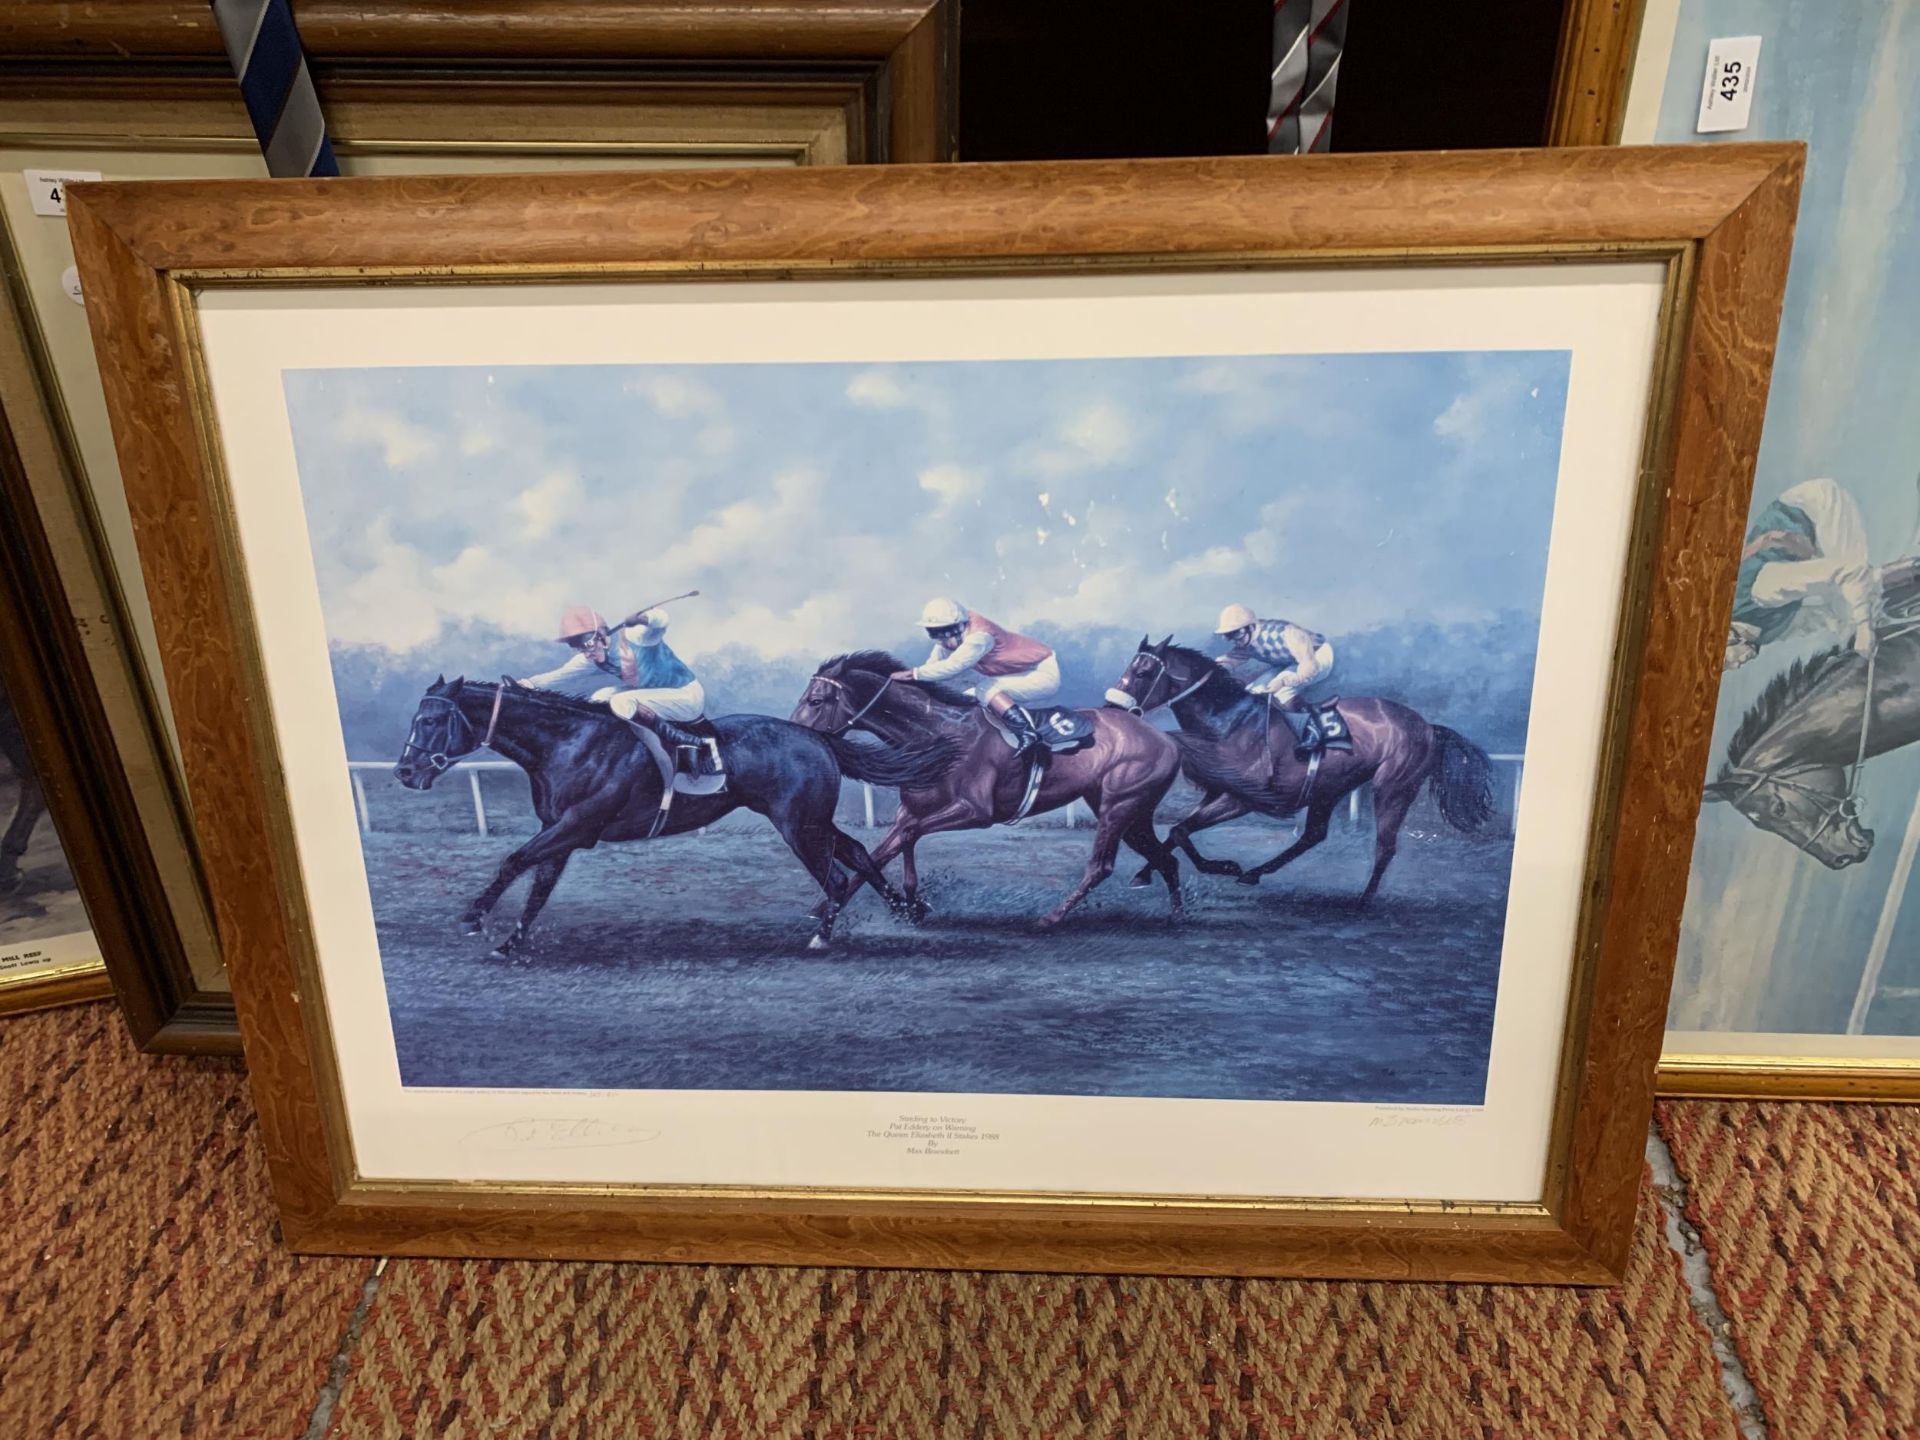 A LIMITED EDITION, 355/850, PRINT OF WARNING WINNING THE QE11 IN 1988, SIGNED BY JOCKEY PAT EDDERY